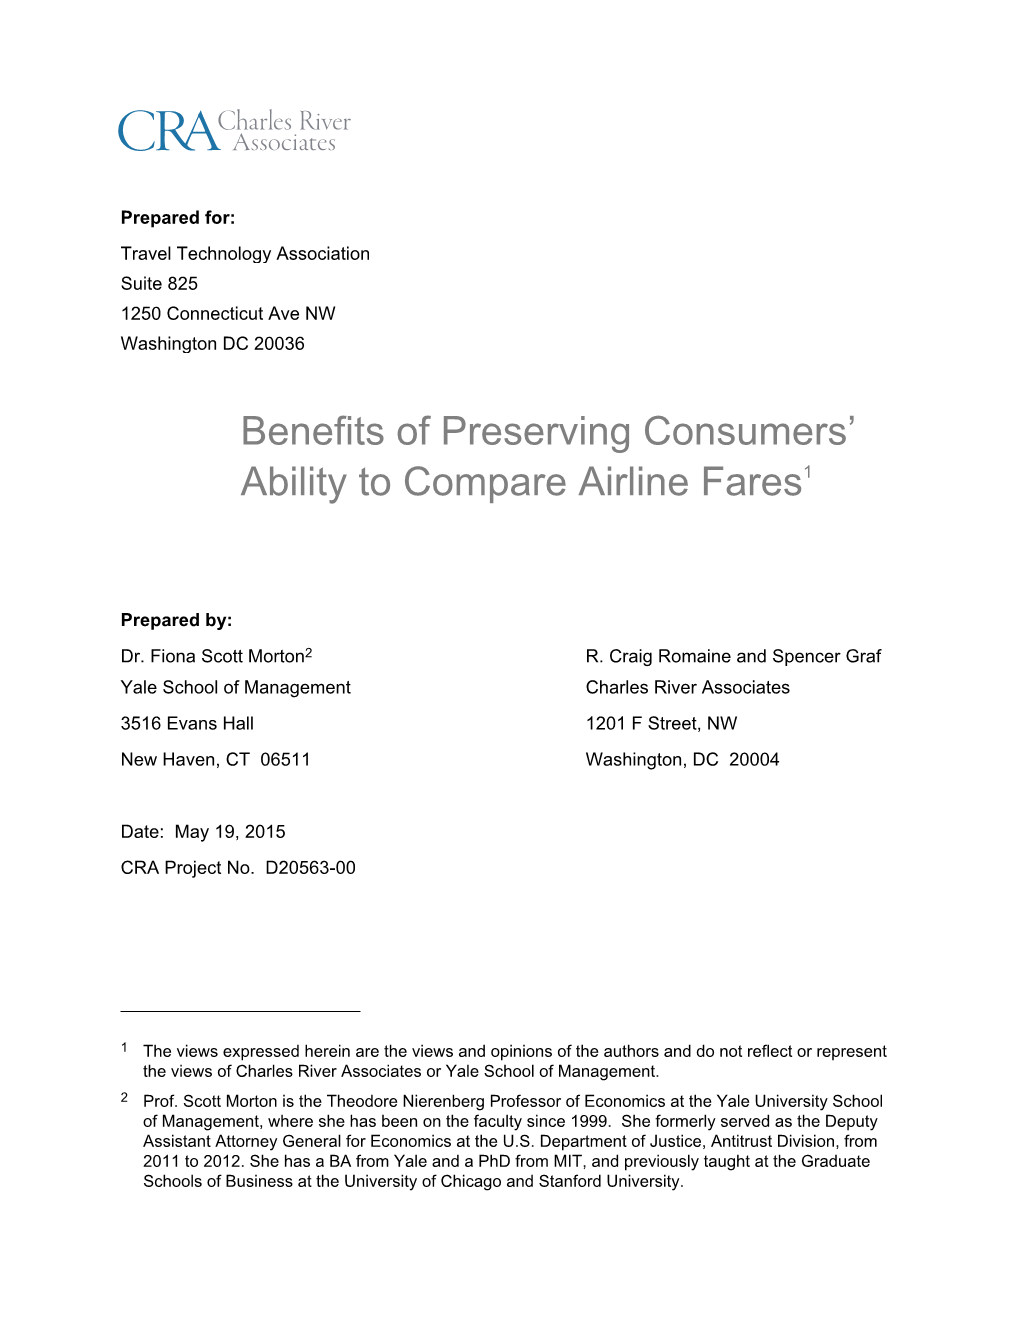 Benefits of Preserving Consumers' Ability to Compare Airline Fares1